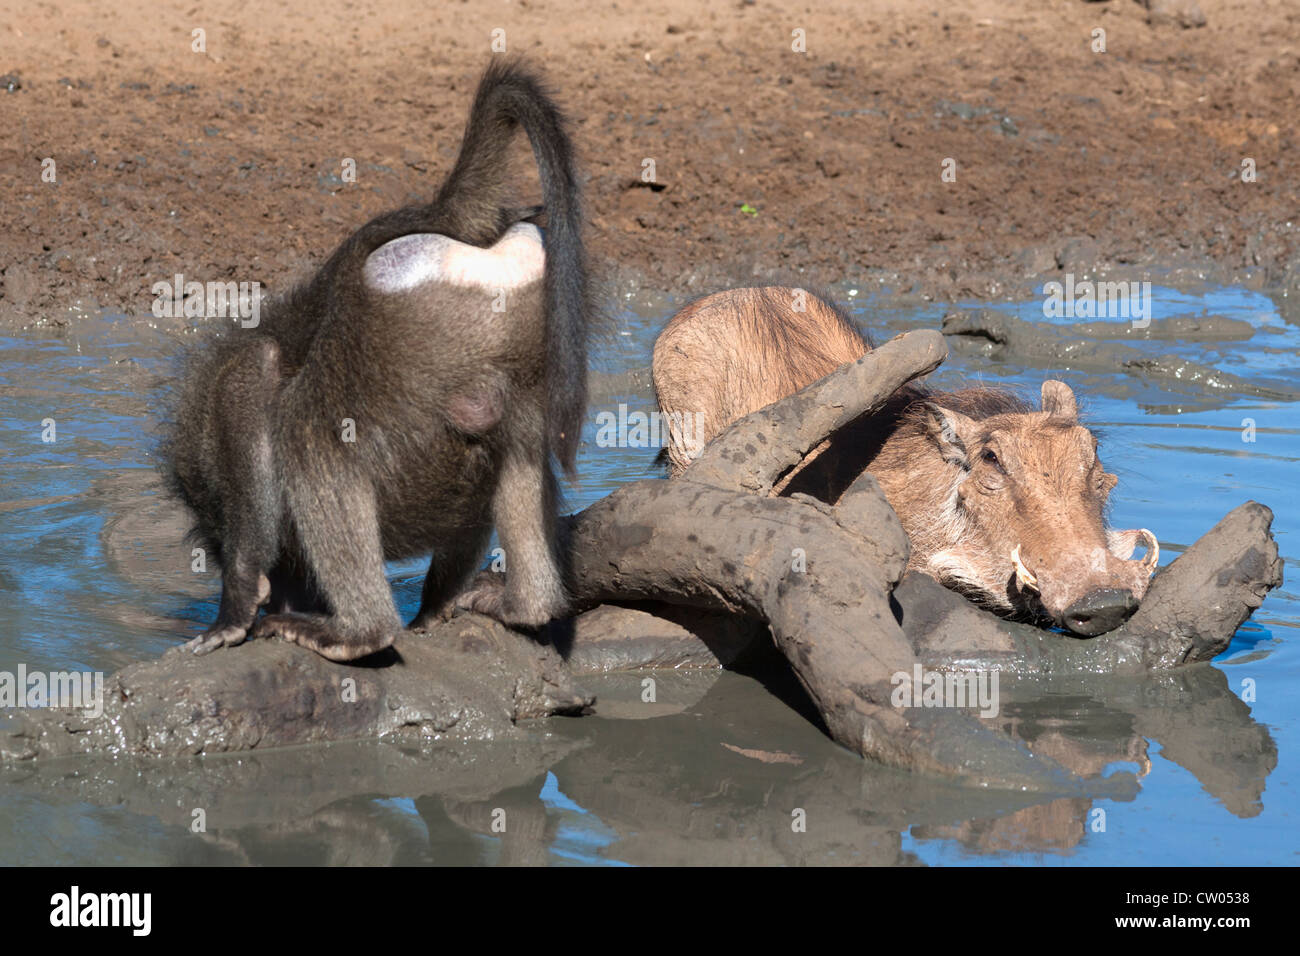 Warthog, (Phacochoerus aethiopicus), drinking next to Chacma baboon, Mkhuze game reserve, South Africa Stock Photo